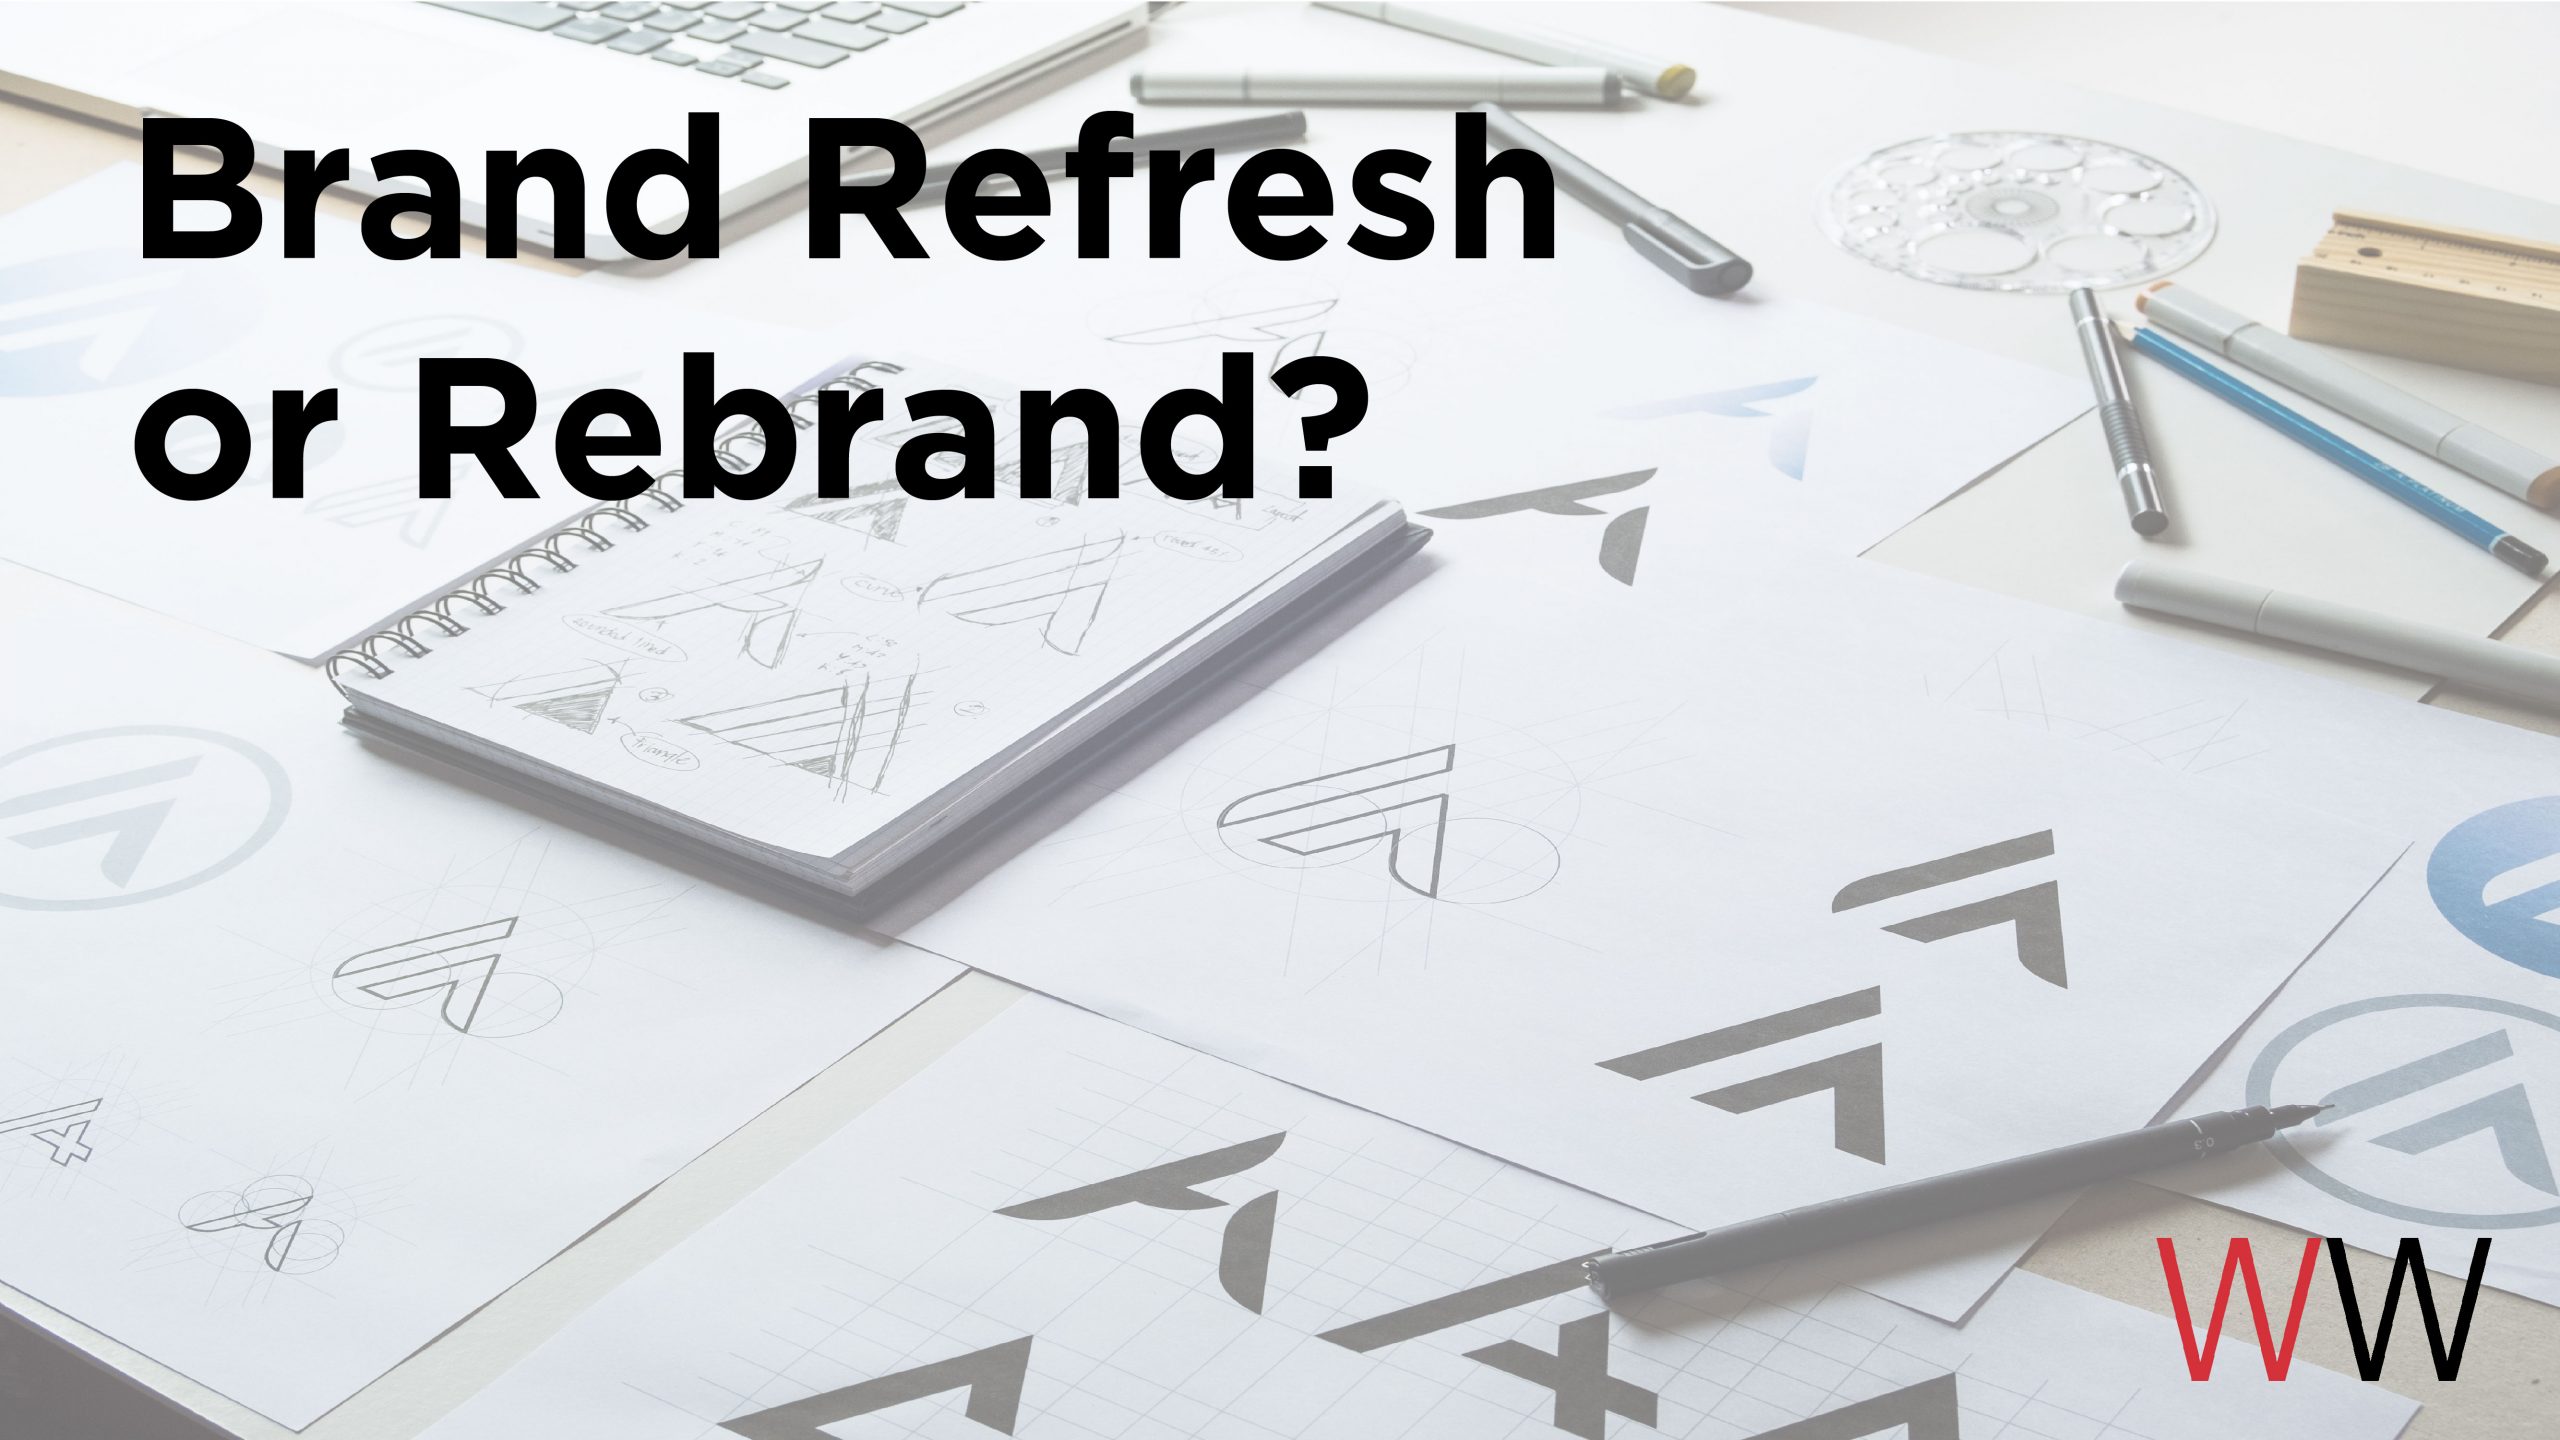 Image of sketches of a logo with the text layed on top of the image that reads- "Brand Refresh or Rebrand."